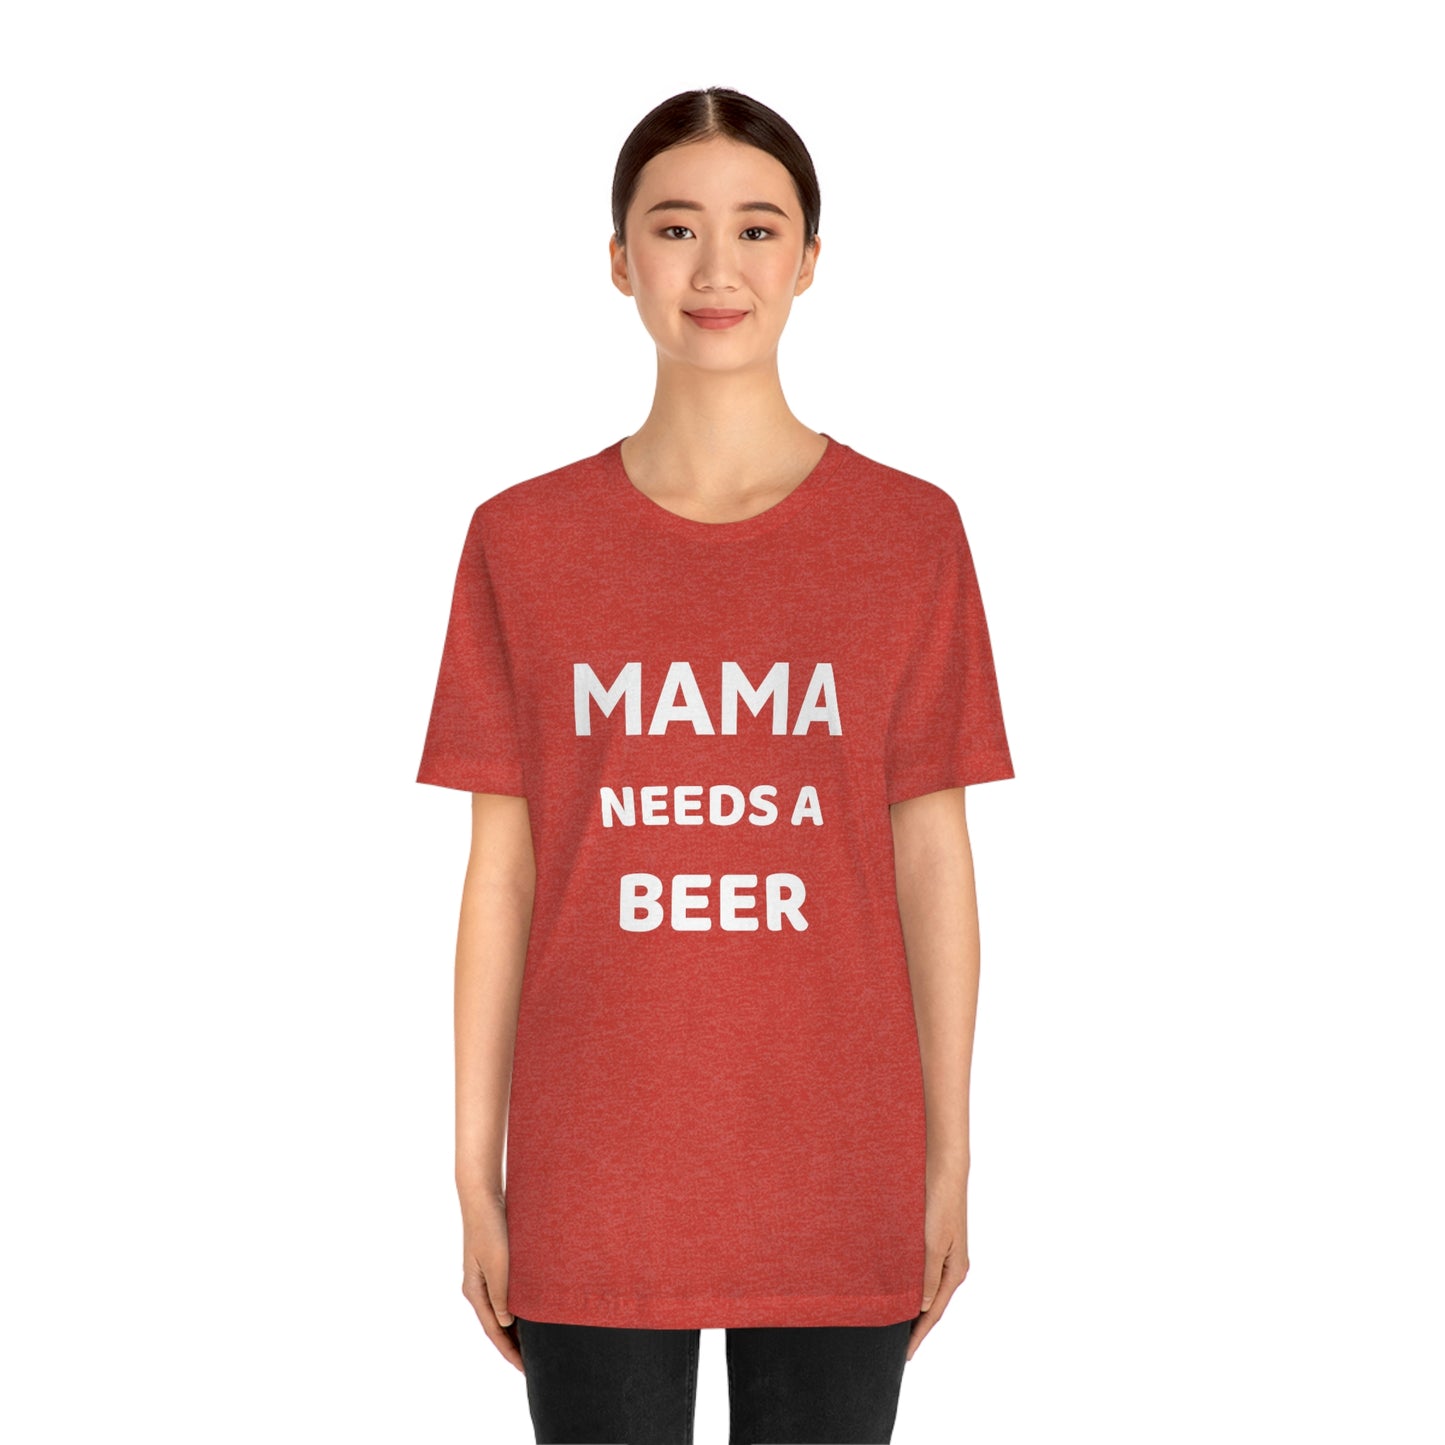 Mama needs a beer - gift for beer lover - Funny beer shirt - Funny shirt